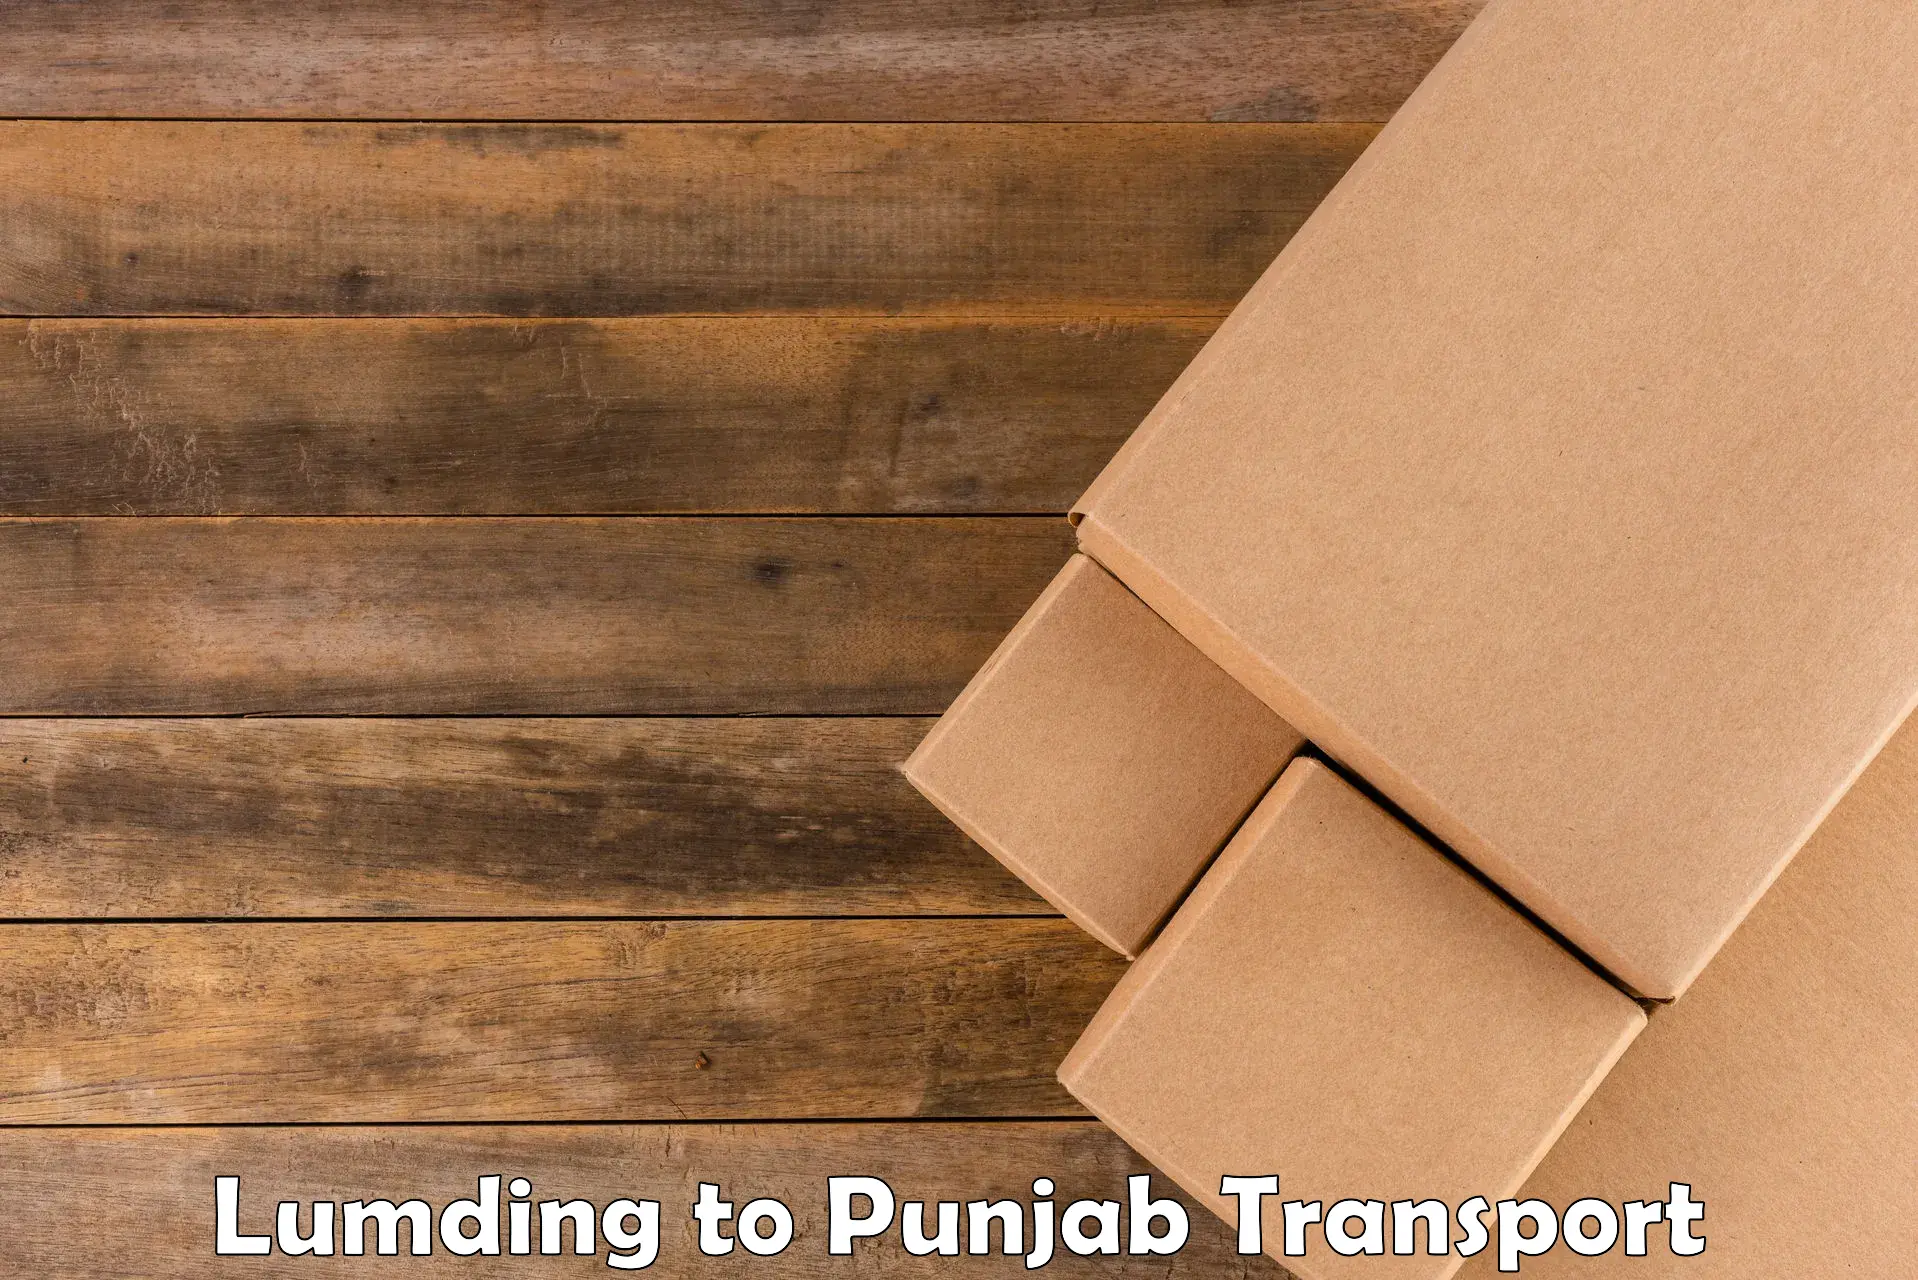 Daily parcel service transport Lumding to Mohali